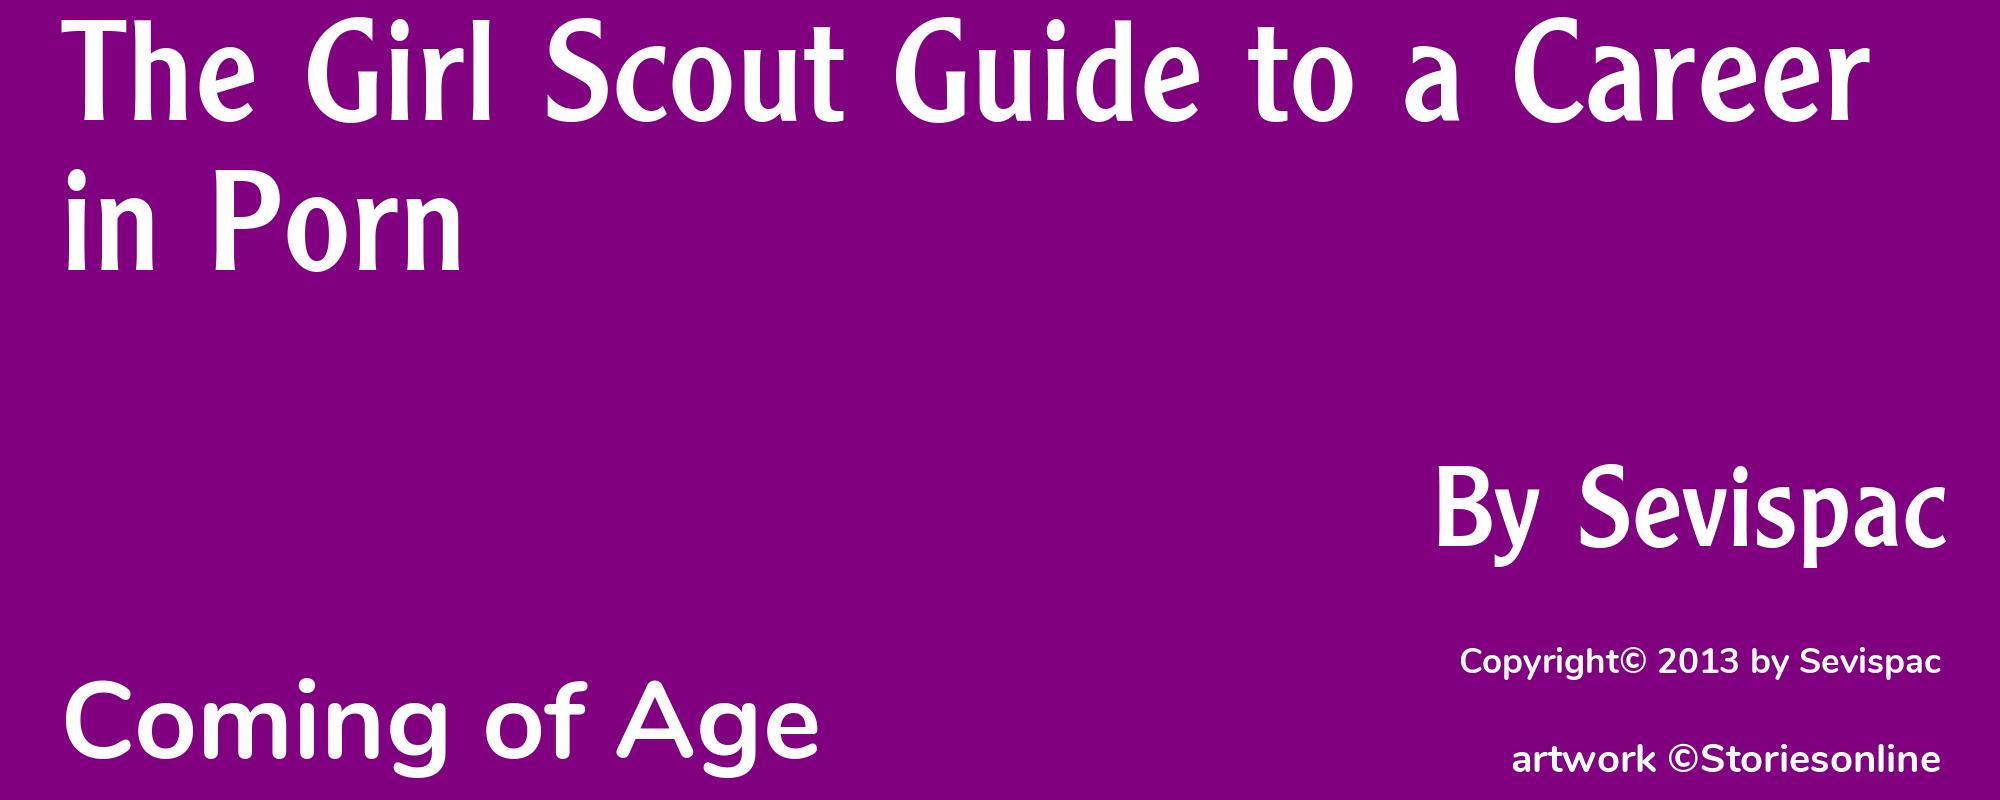 The Girl Scout Guide to a Career in Porn - Cover